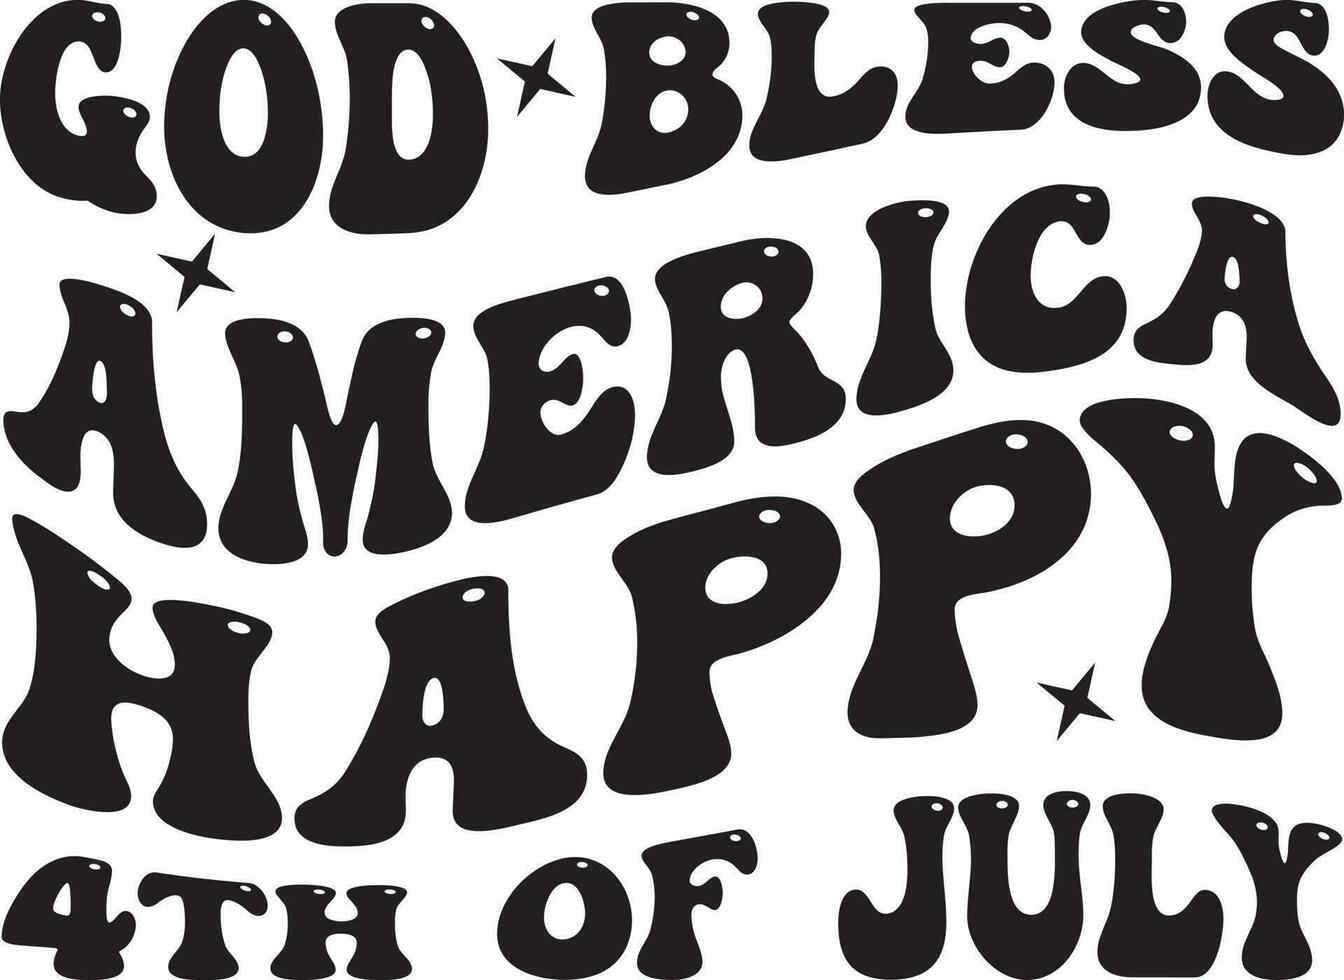 God bless America happy 4th of July typography t-shirt design vector